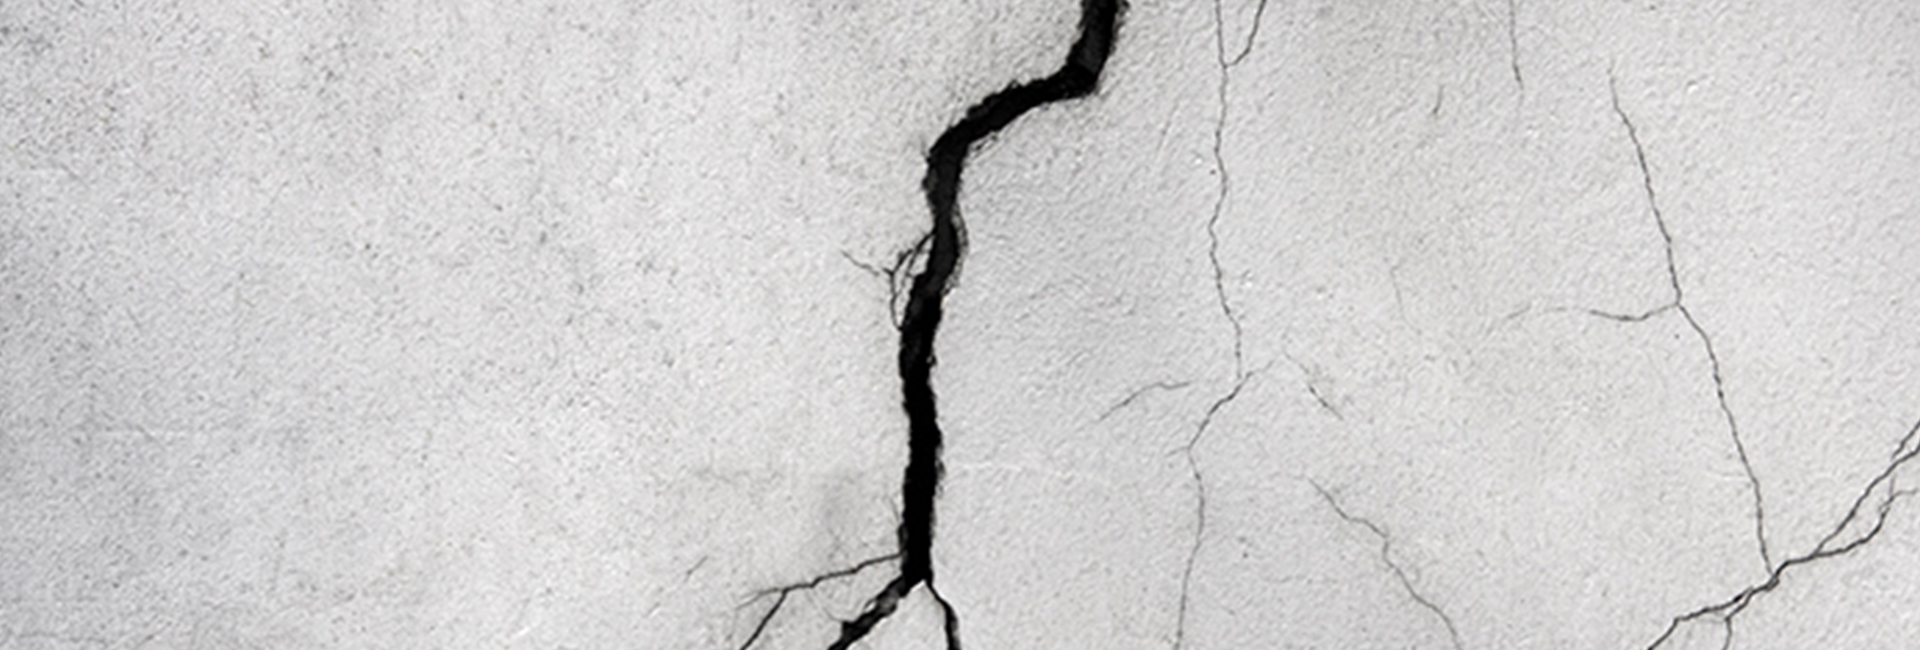 Reasons Why Concrete Crack and How We Can Save It from Cracking